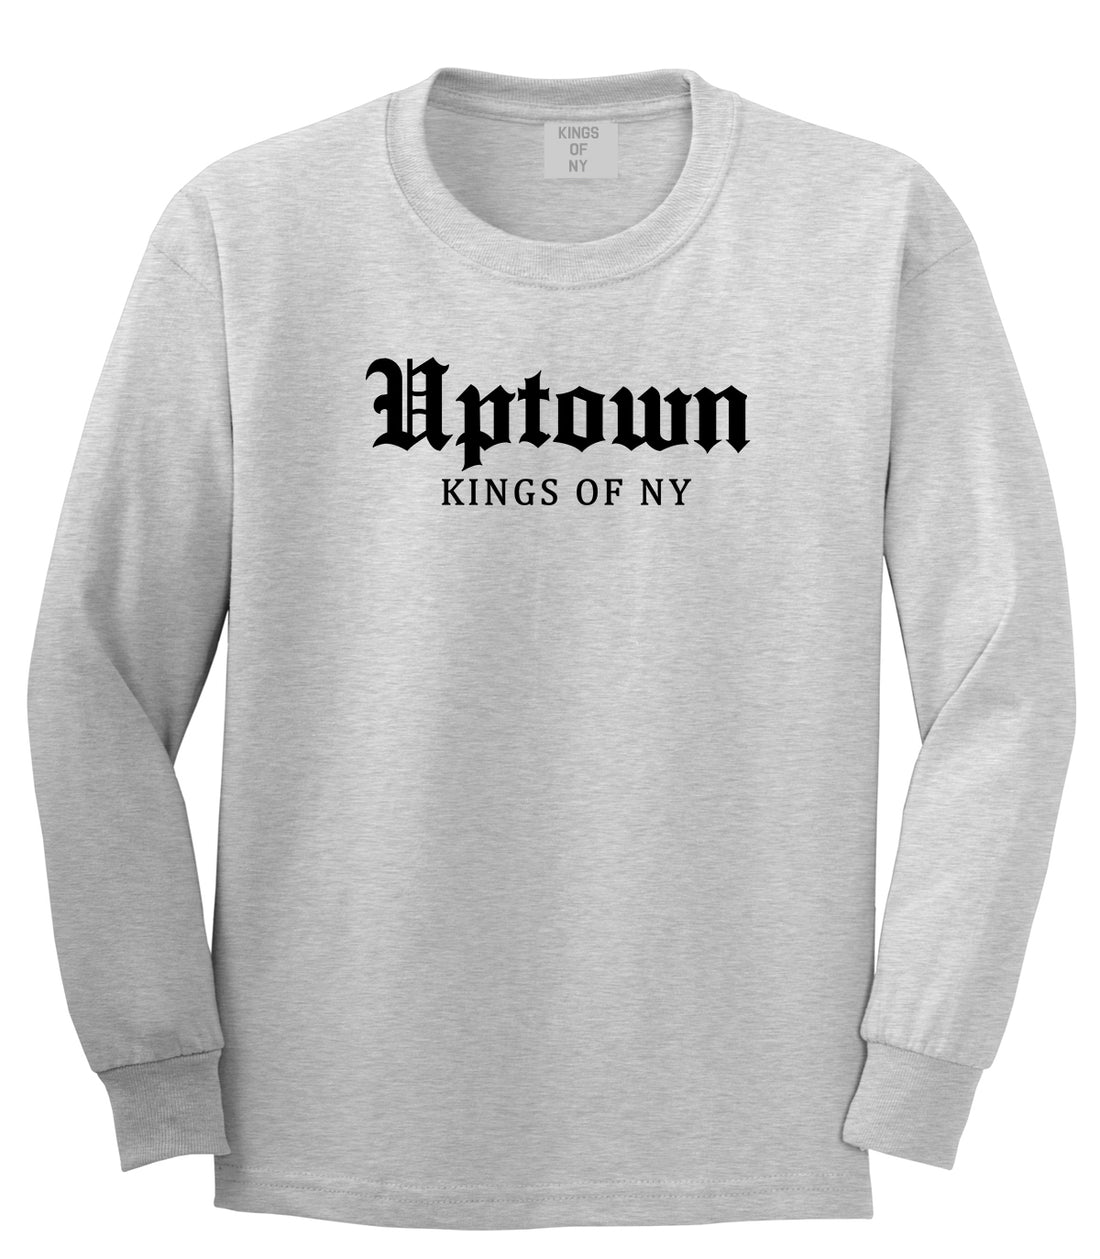 Uptown Old English Mens Long Sleeve T-Shirt Grey by Kings Of NY